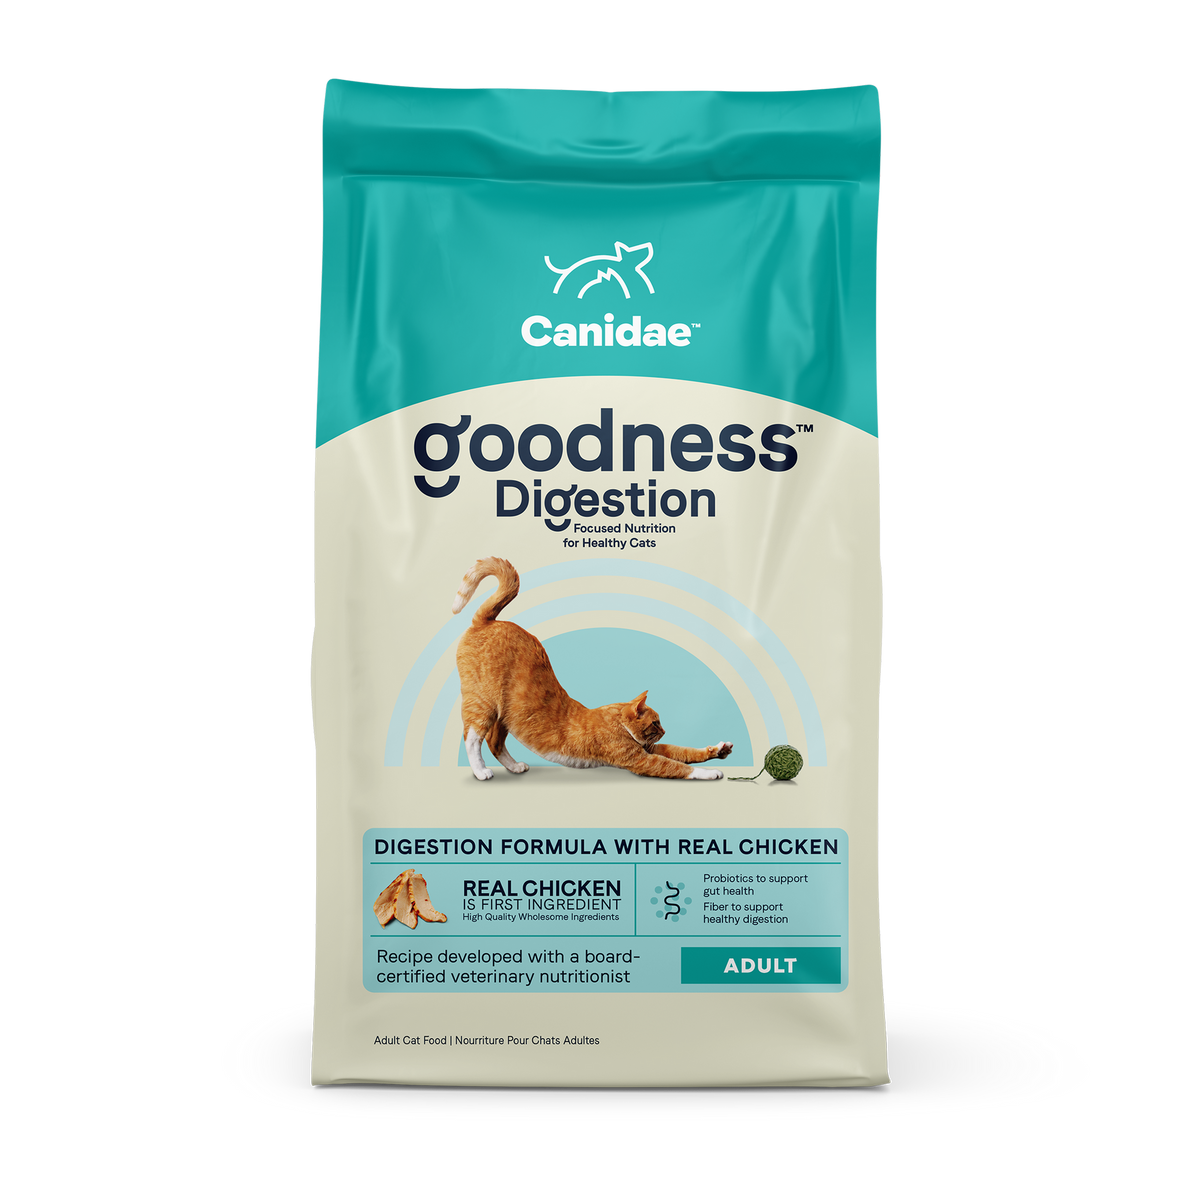 Canidae - Goodness for Digestion Dry Cat Food with Real Chicken